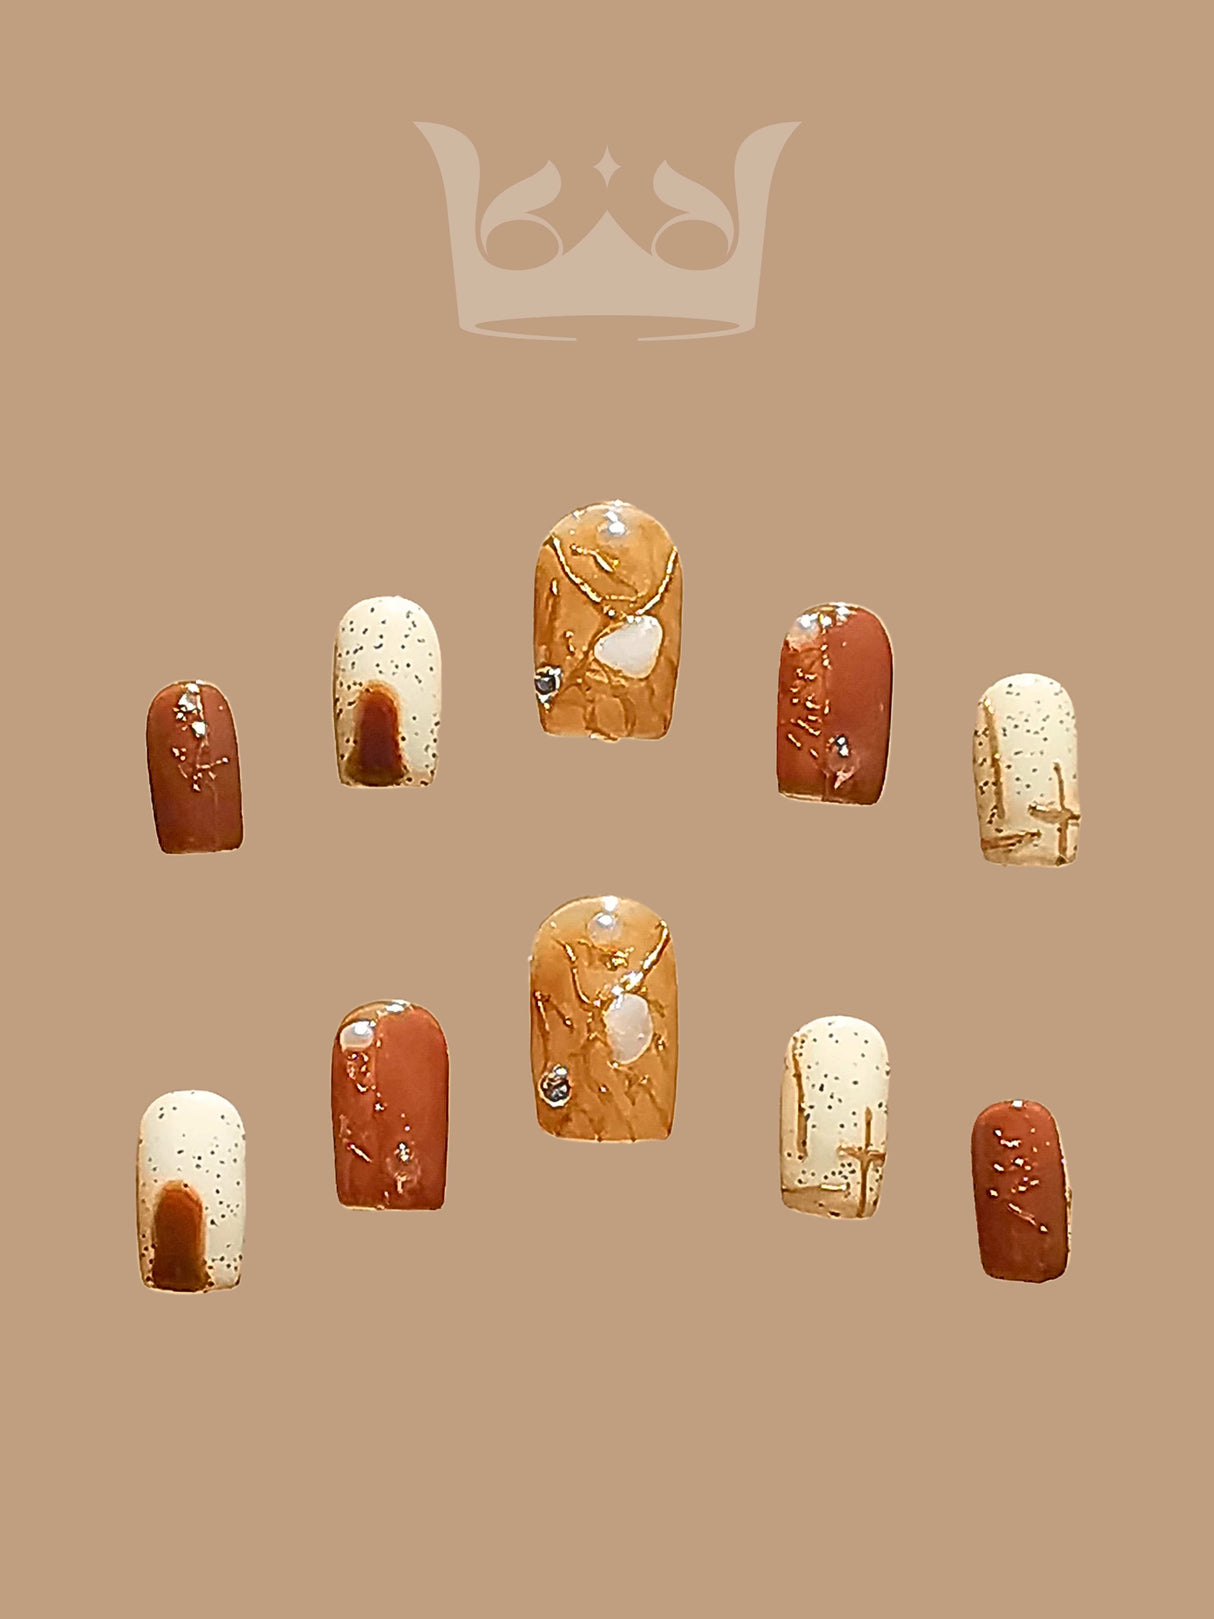 These press-on nails with various designs and embellishments catering to different styles. They have a neutral color palette and may be marketed towards those who prefer natural or earthy aesthetics.